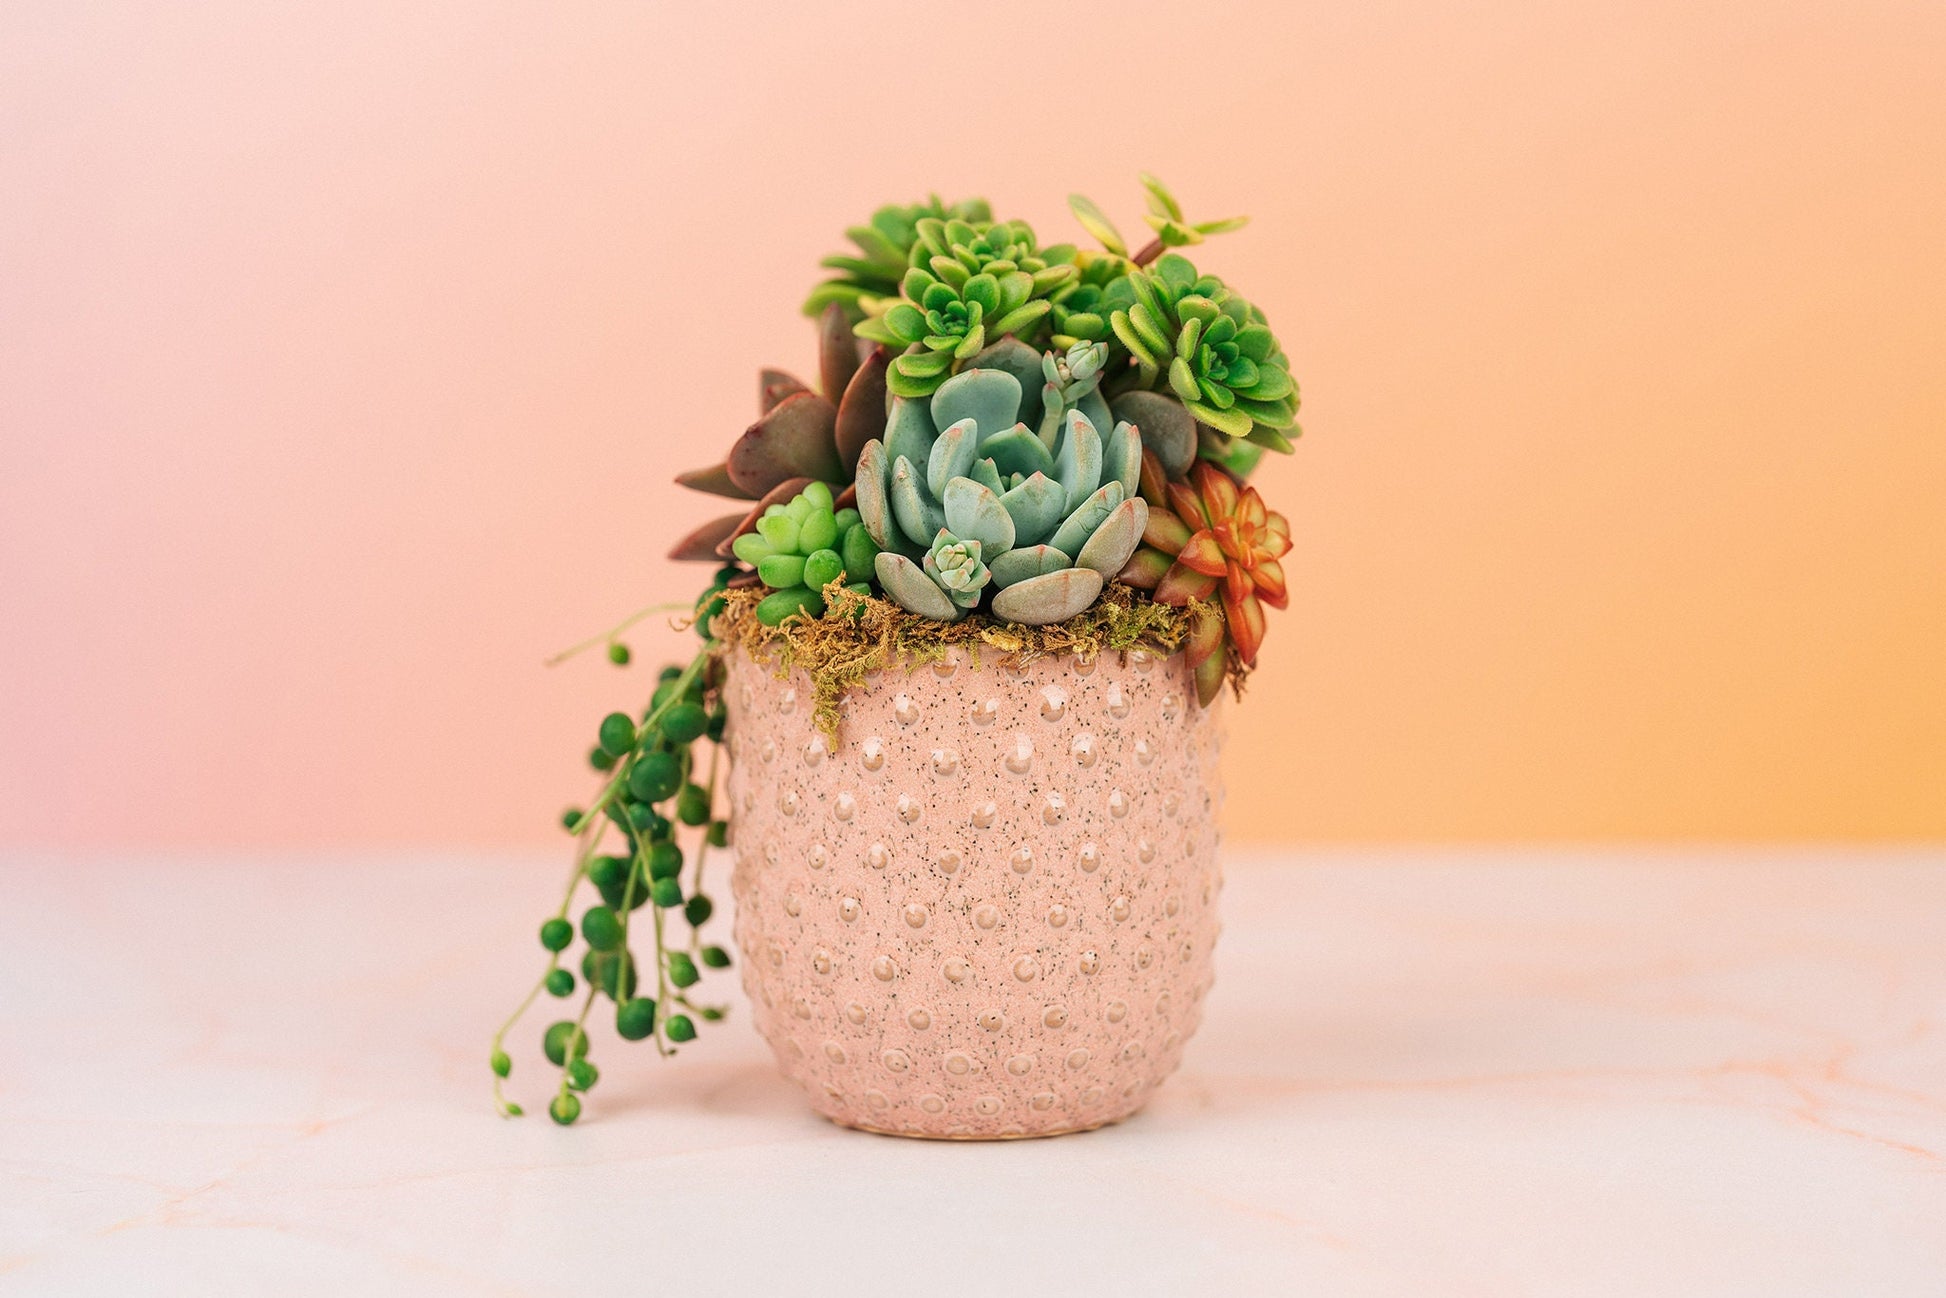 Mini Pink Succulent Arrangement Planter | Client Gift, Party Favor, Birthday, House Warming Gift for Plant Lovers | Gift for Mom